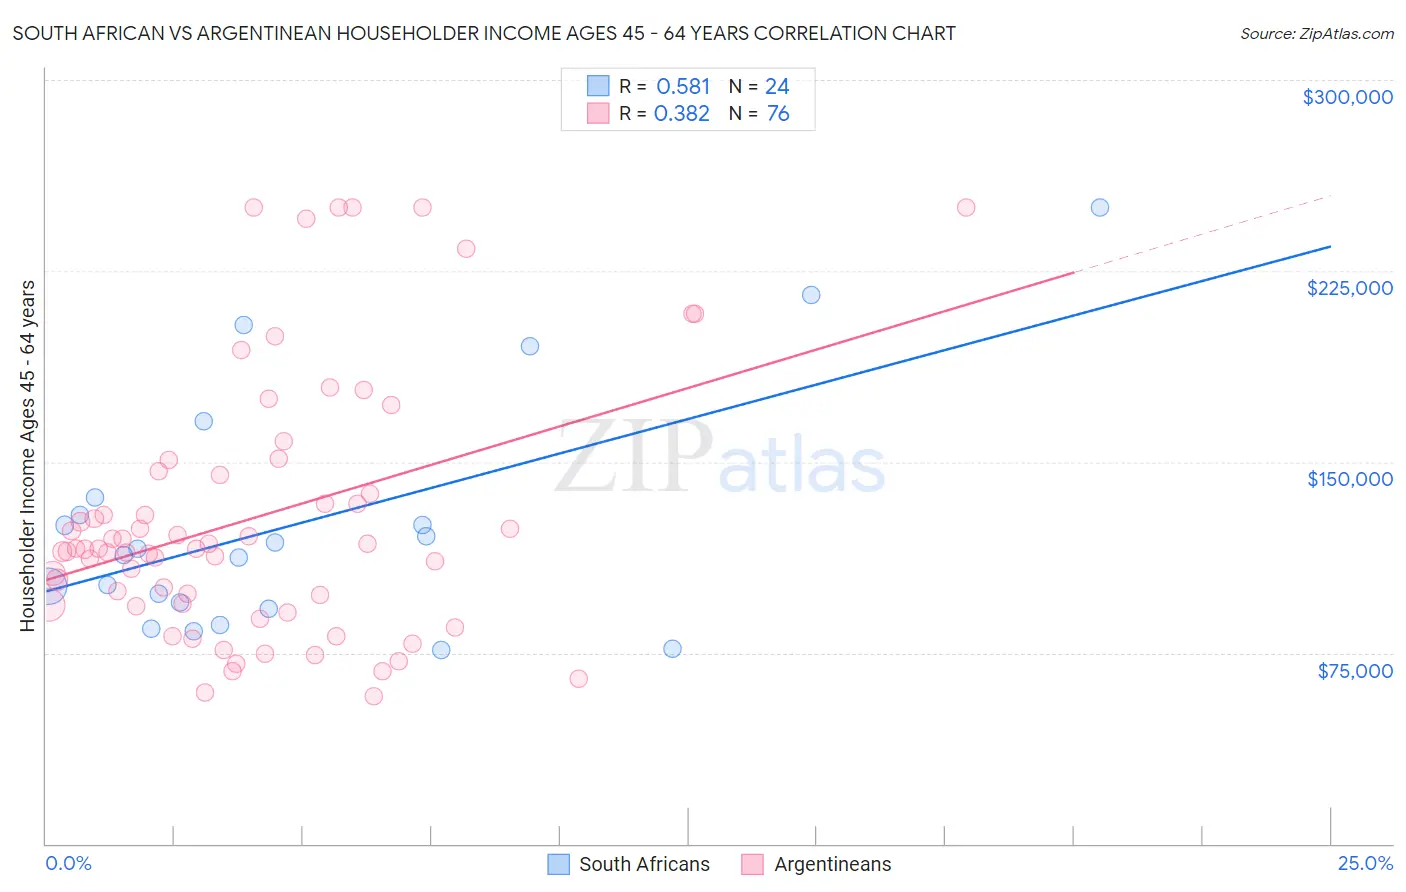 South African vs Argentinean Householder Income Ages 45 - 64 years